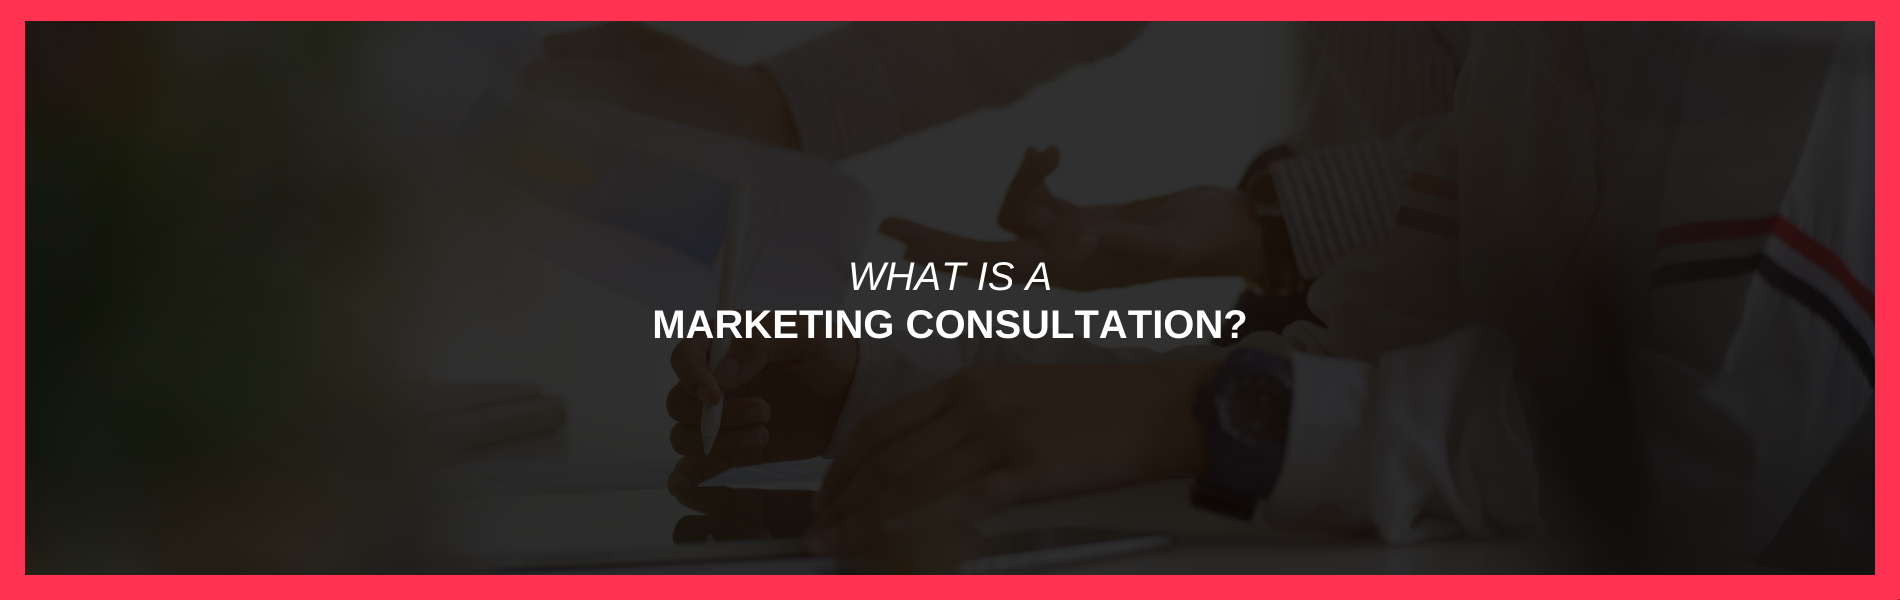 What is a Marketing Consultation?